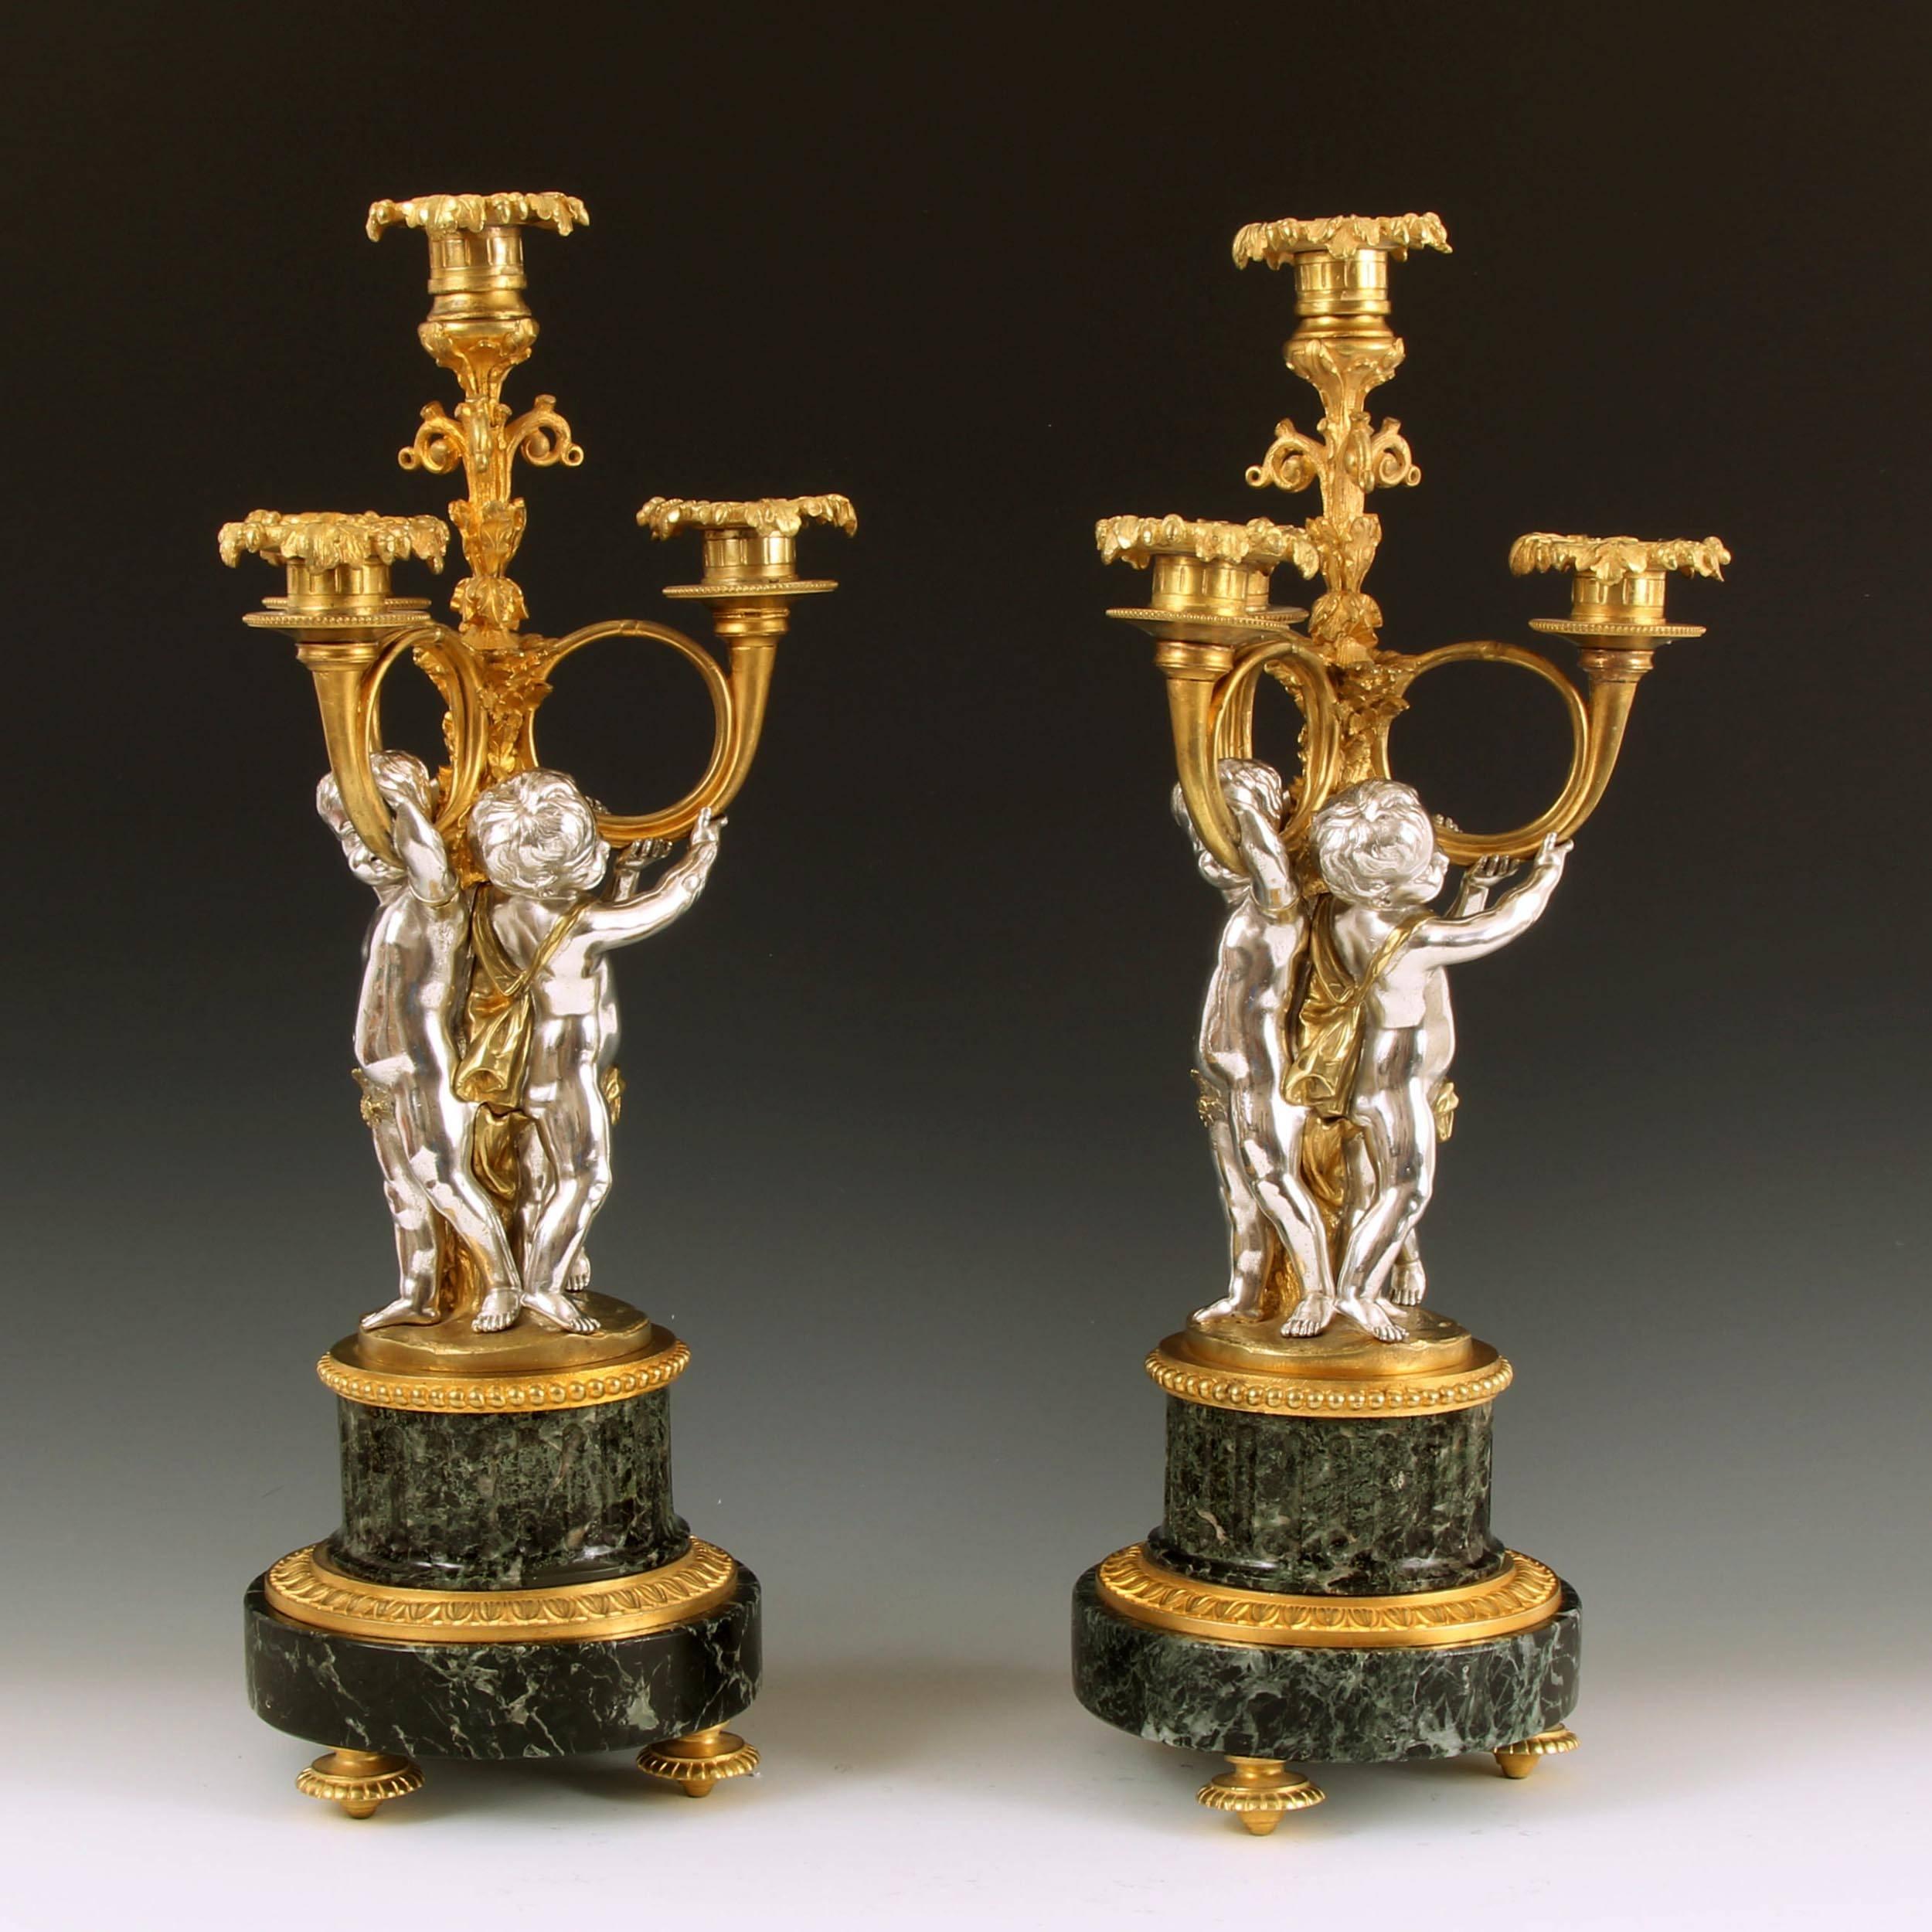 A fine pair of four-light gilt bronze candelabra each supported by three finely modelled silvered putti, standing on verde antico stepped marble bases. Each candelabra stamped with the makers mark VP beneath a crown. 

Victor Paillard (1805-1886),